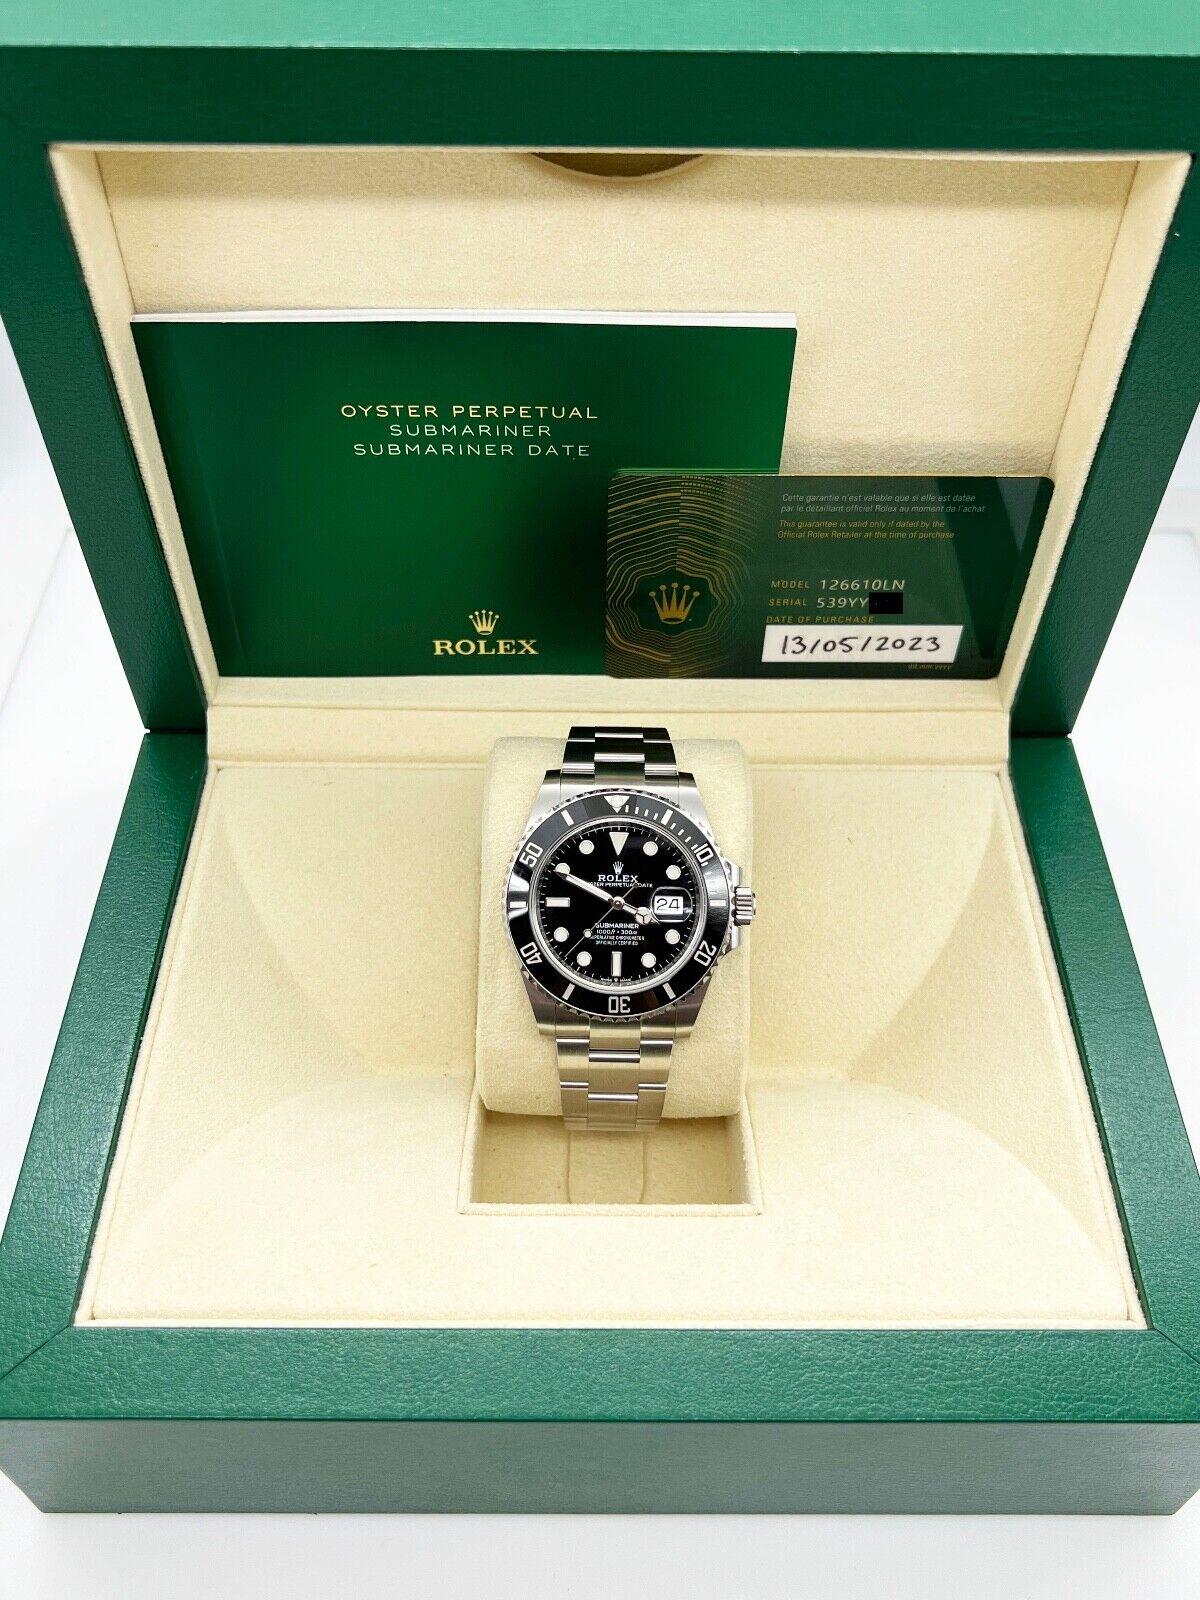 Style Number: 126610



Serial: 539YY***



Year: 2023

 

Model: Submariner

 

Case Material: Stainless Steel 

 

Band: Stainless Steel 

 

Bezel: Black Ceramic 

 

Dial: Black 

 

Face: Sapphire Crystal 

 

Case Size: 41mm 

 

Includes: